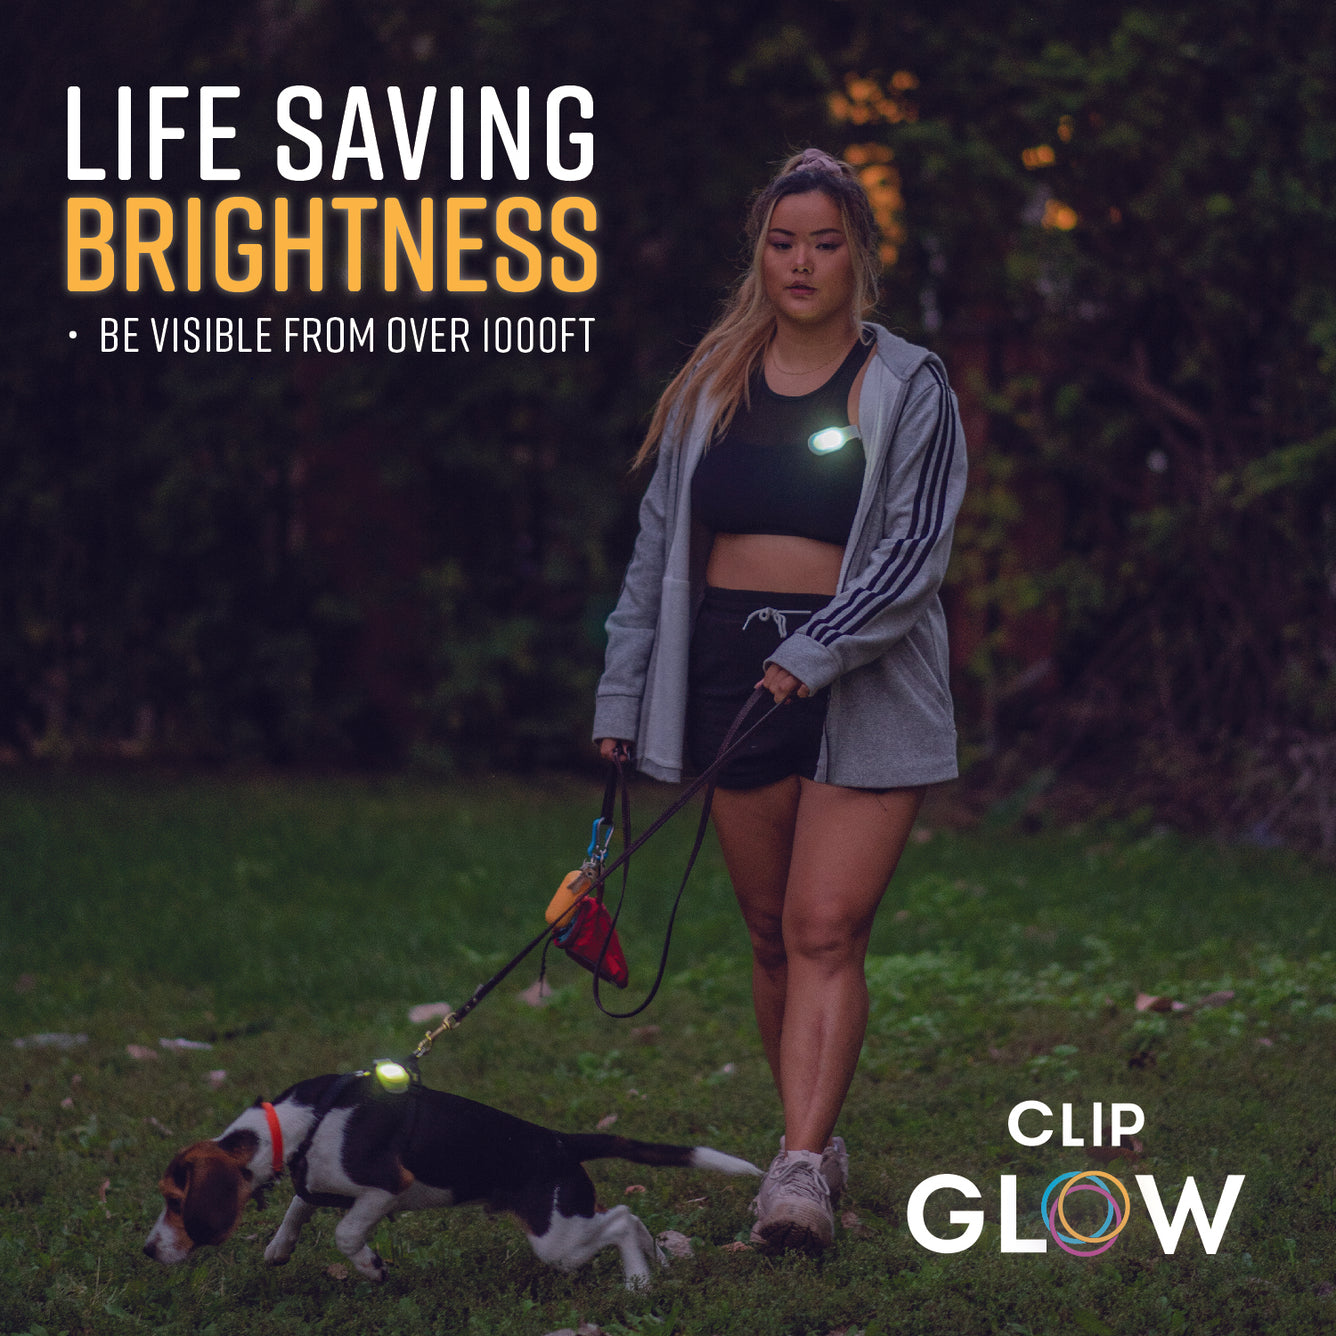 ClipGlow - Rechargeable Handsfree Magnetic Flashlight